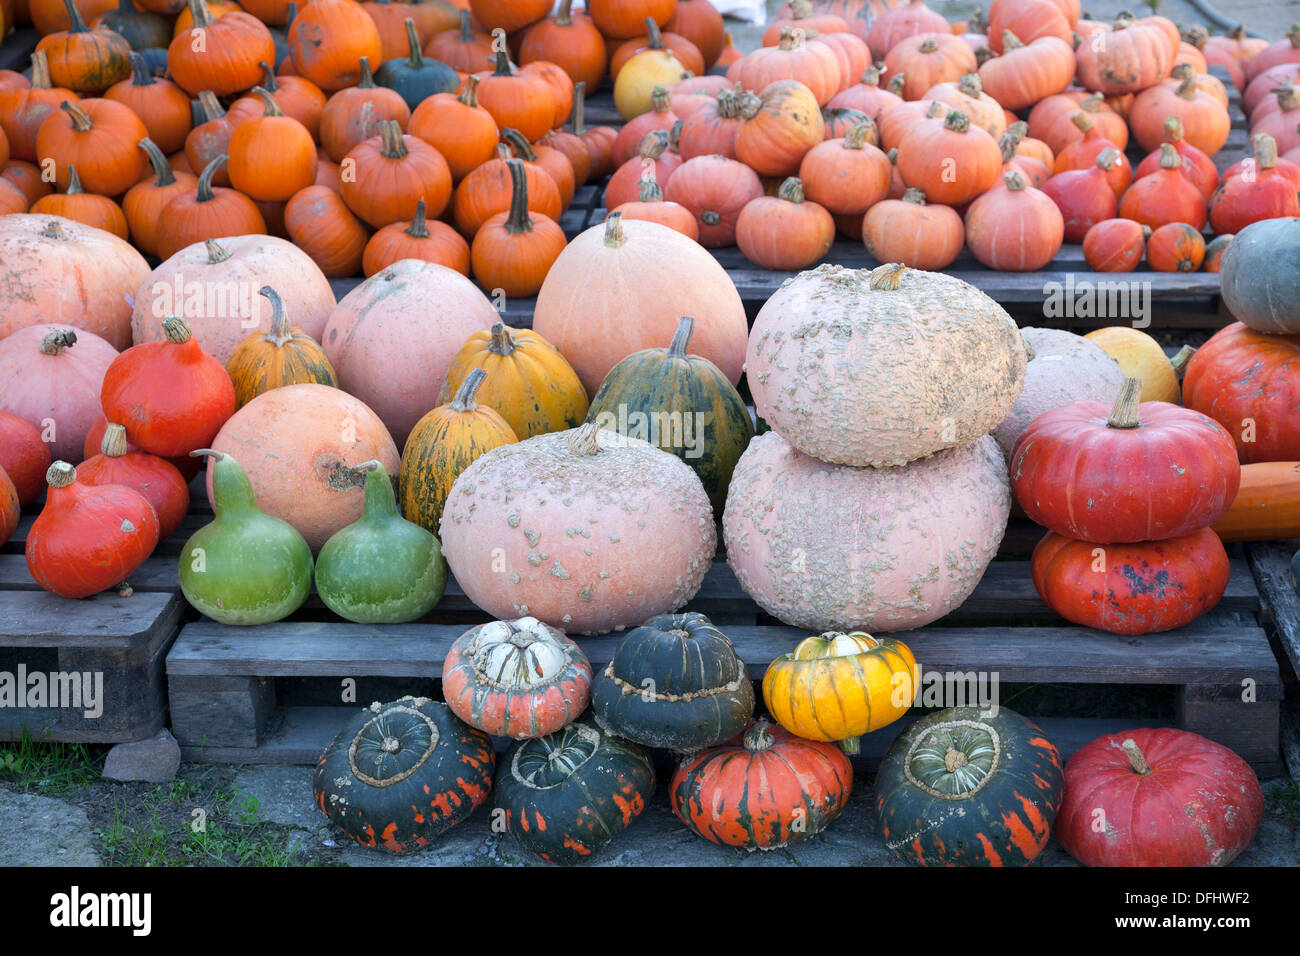 Pumpkins and squashes Stock Photo